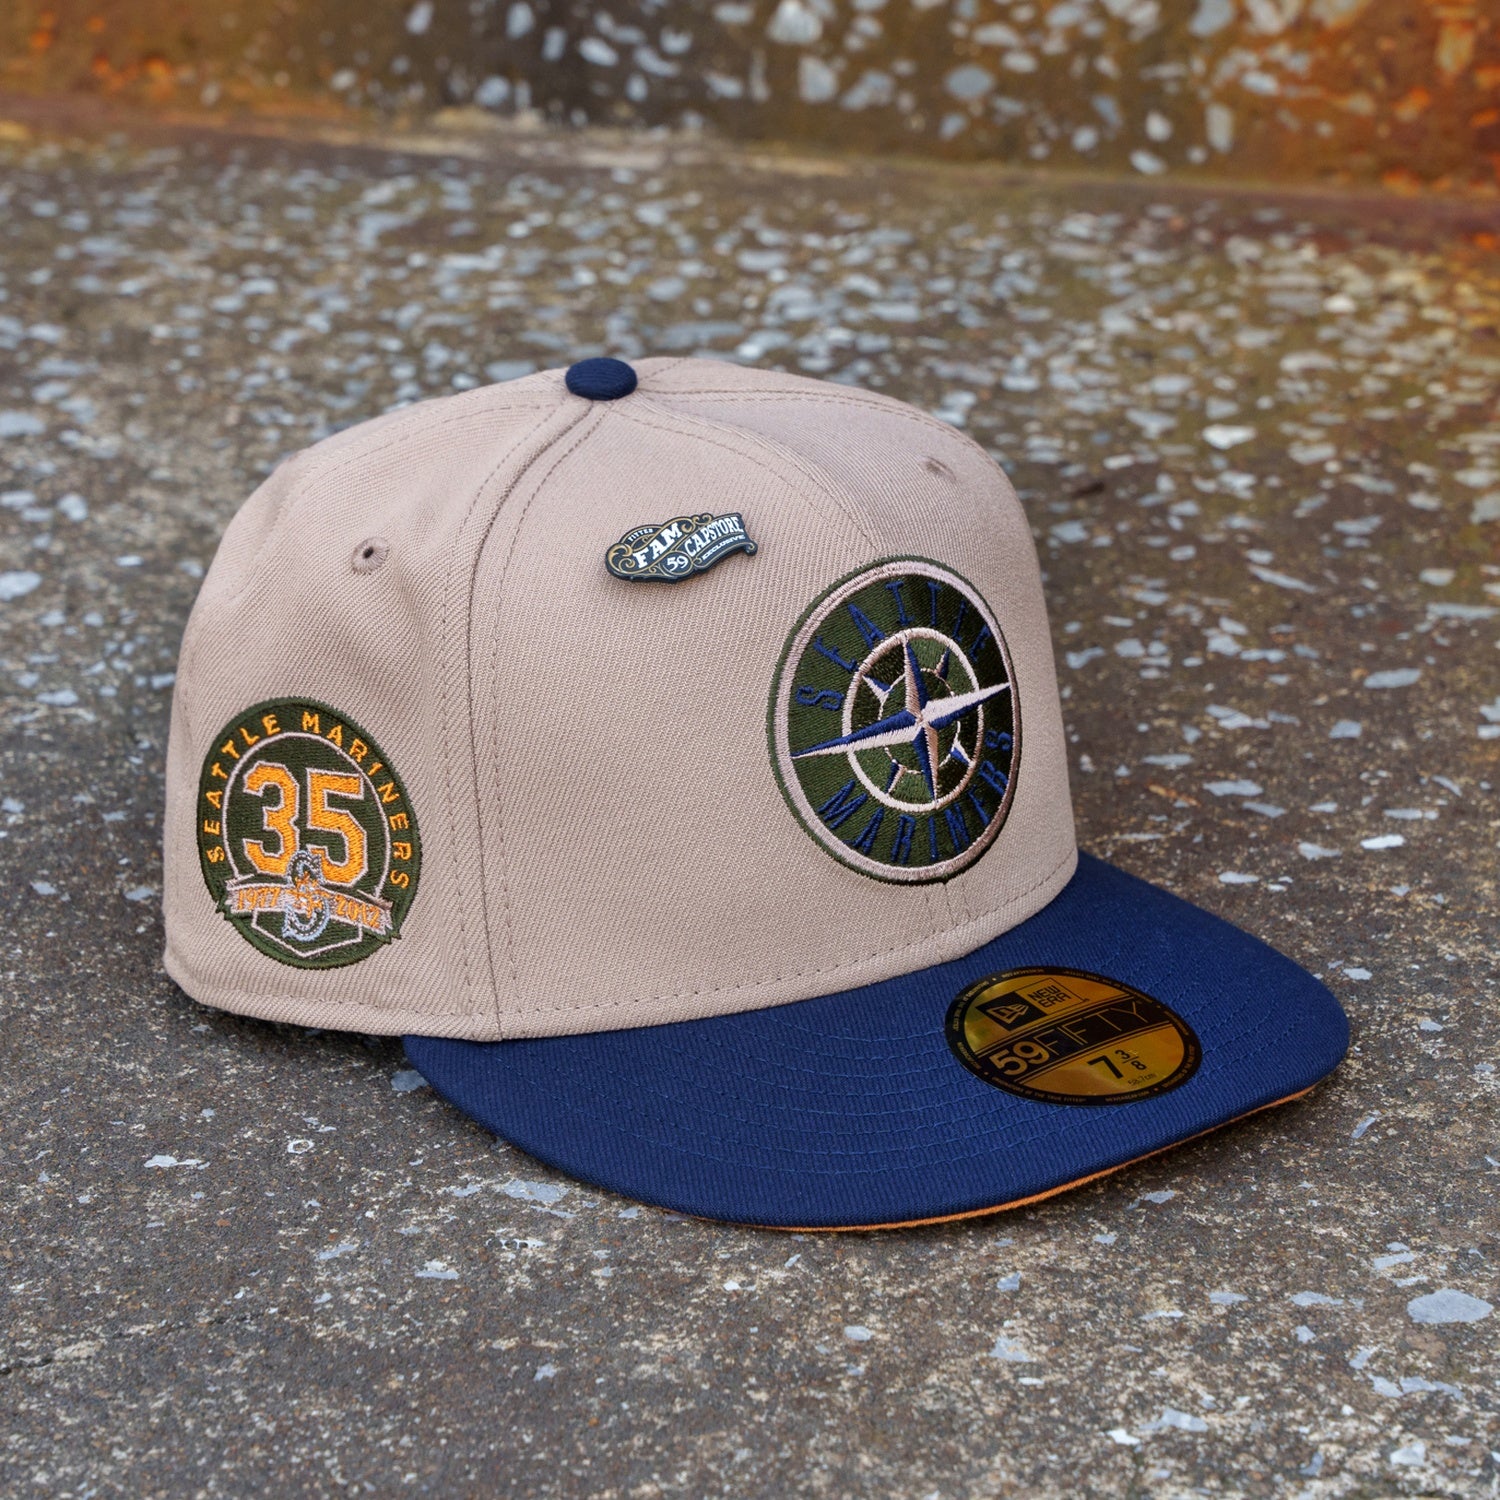 NEW ERA 59FIFTY MLB SEATTLE MARINERS 35TH ANNIVERSARY TWO TONE / ORANGE UV FITTED CAP